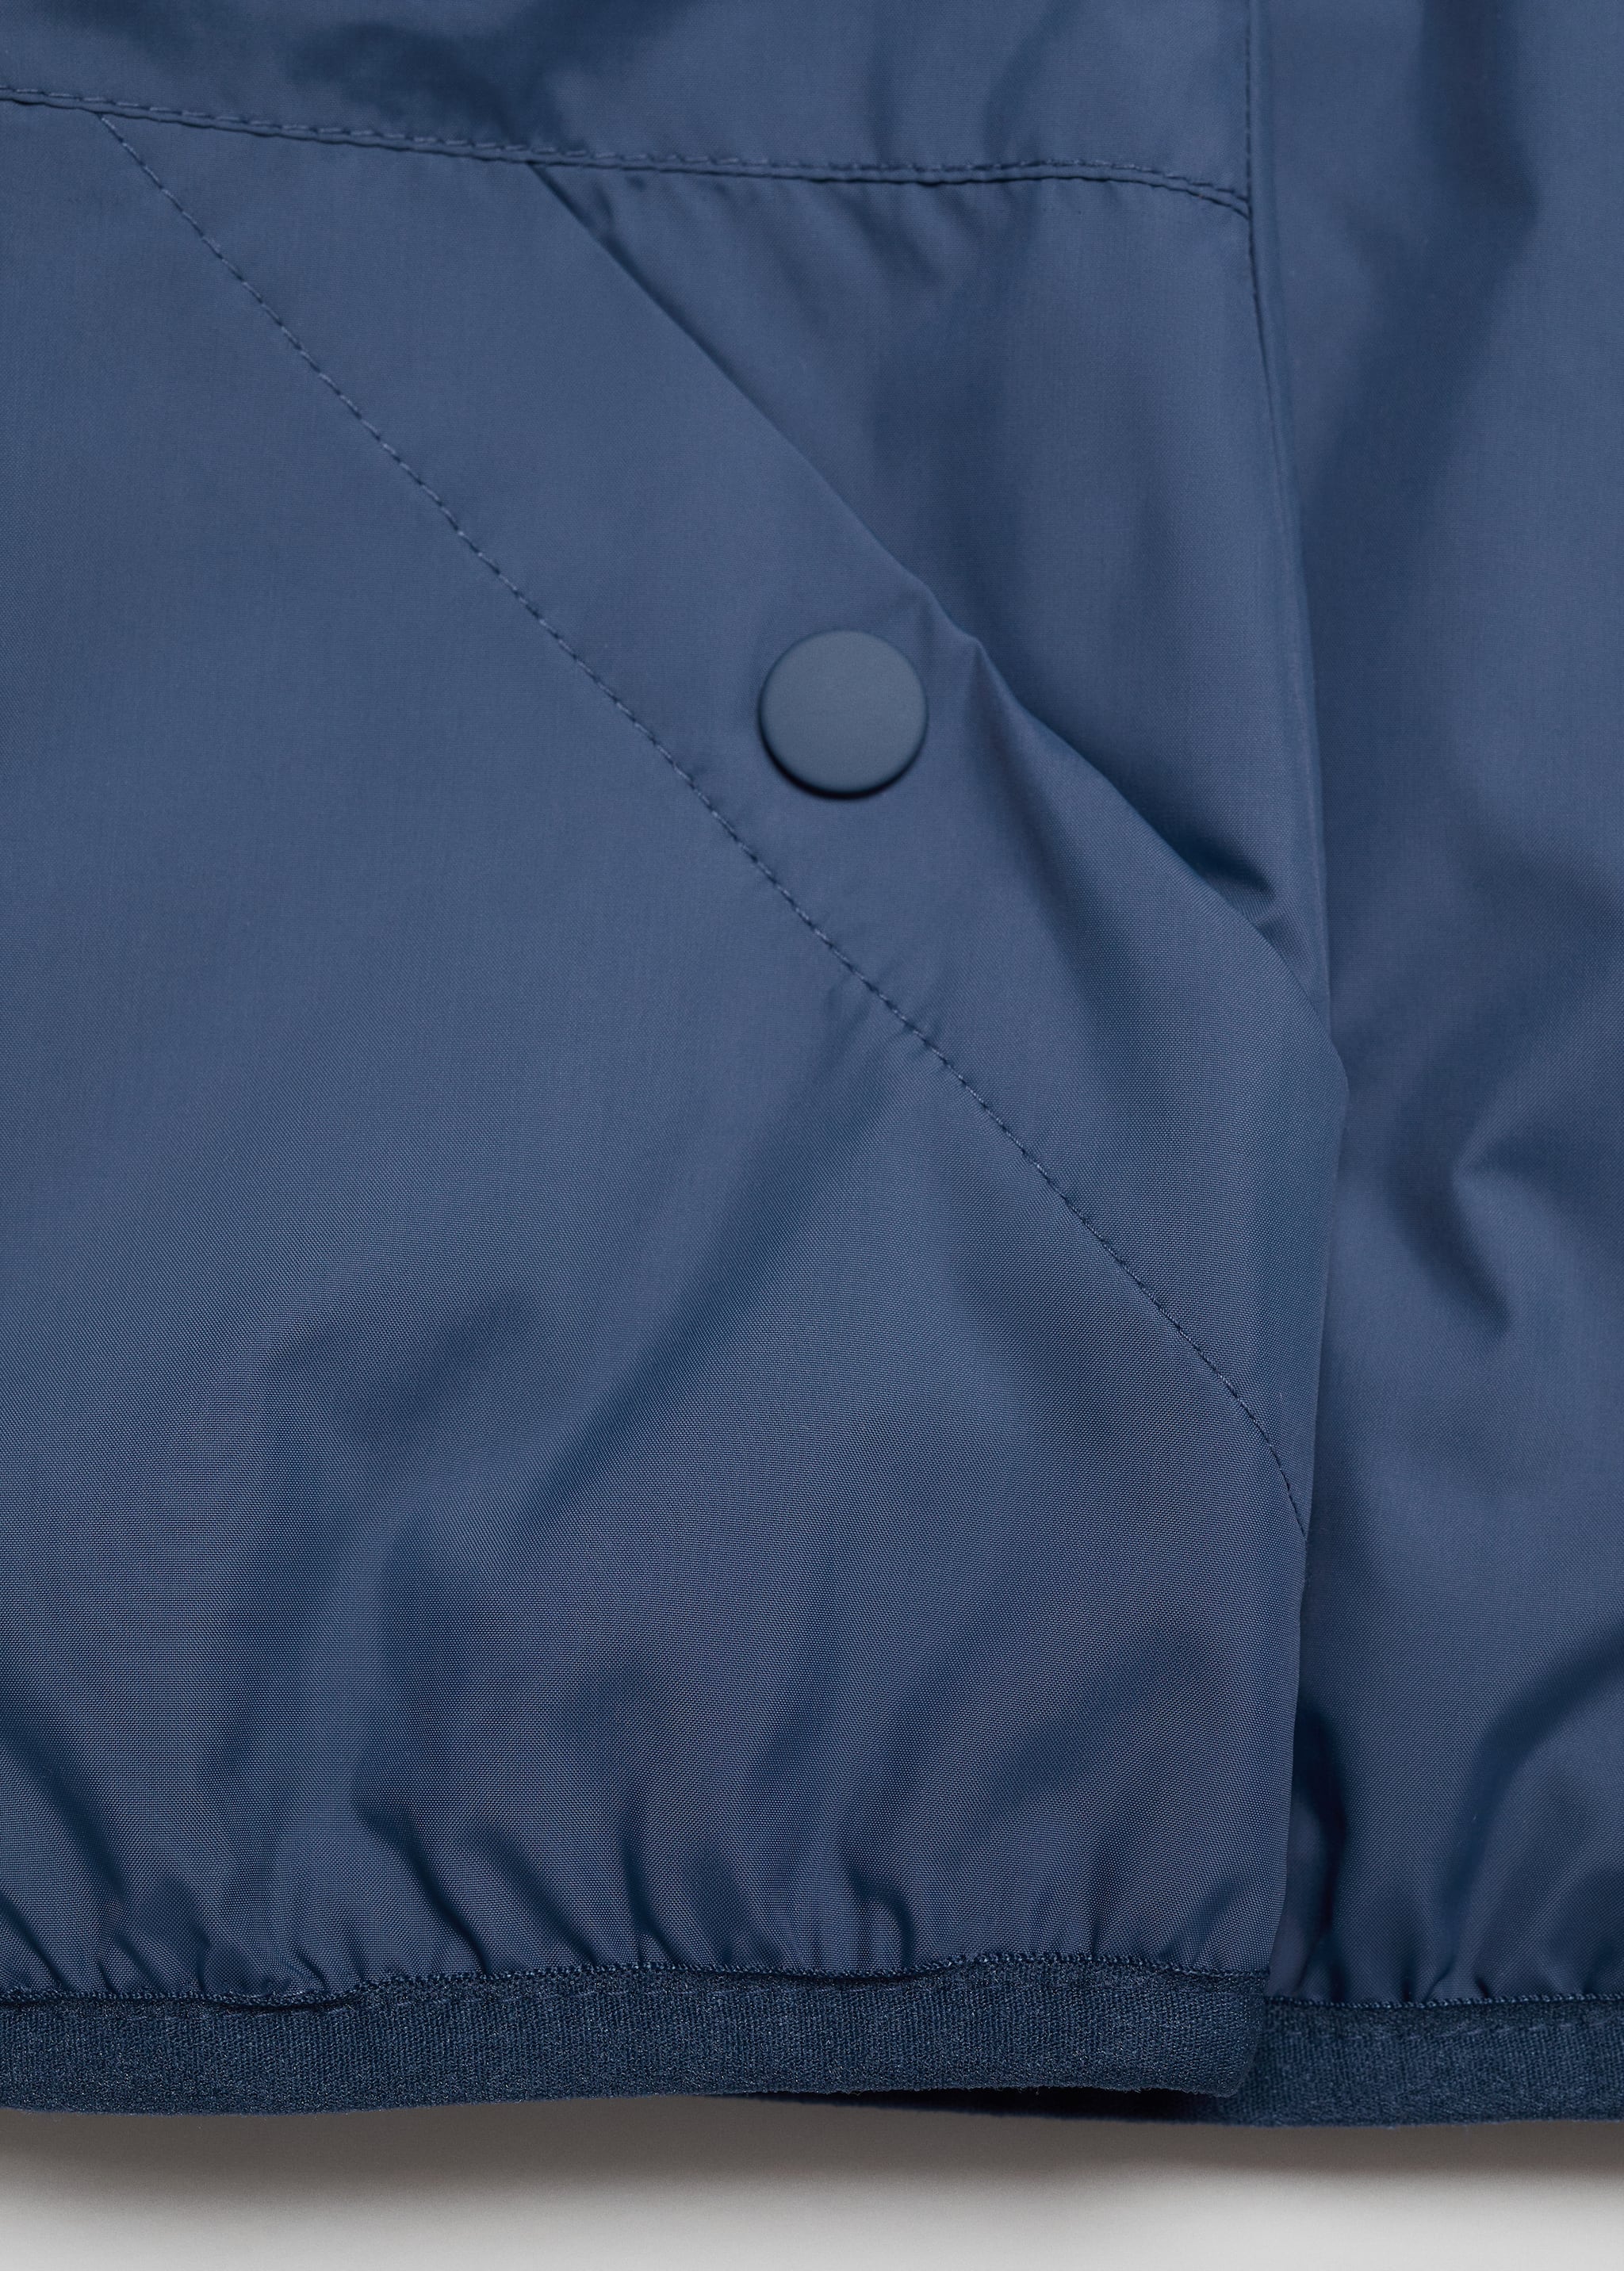 Hooded parka - Details of the article 0